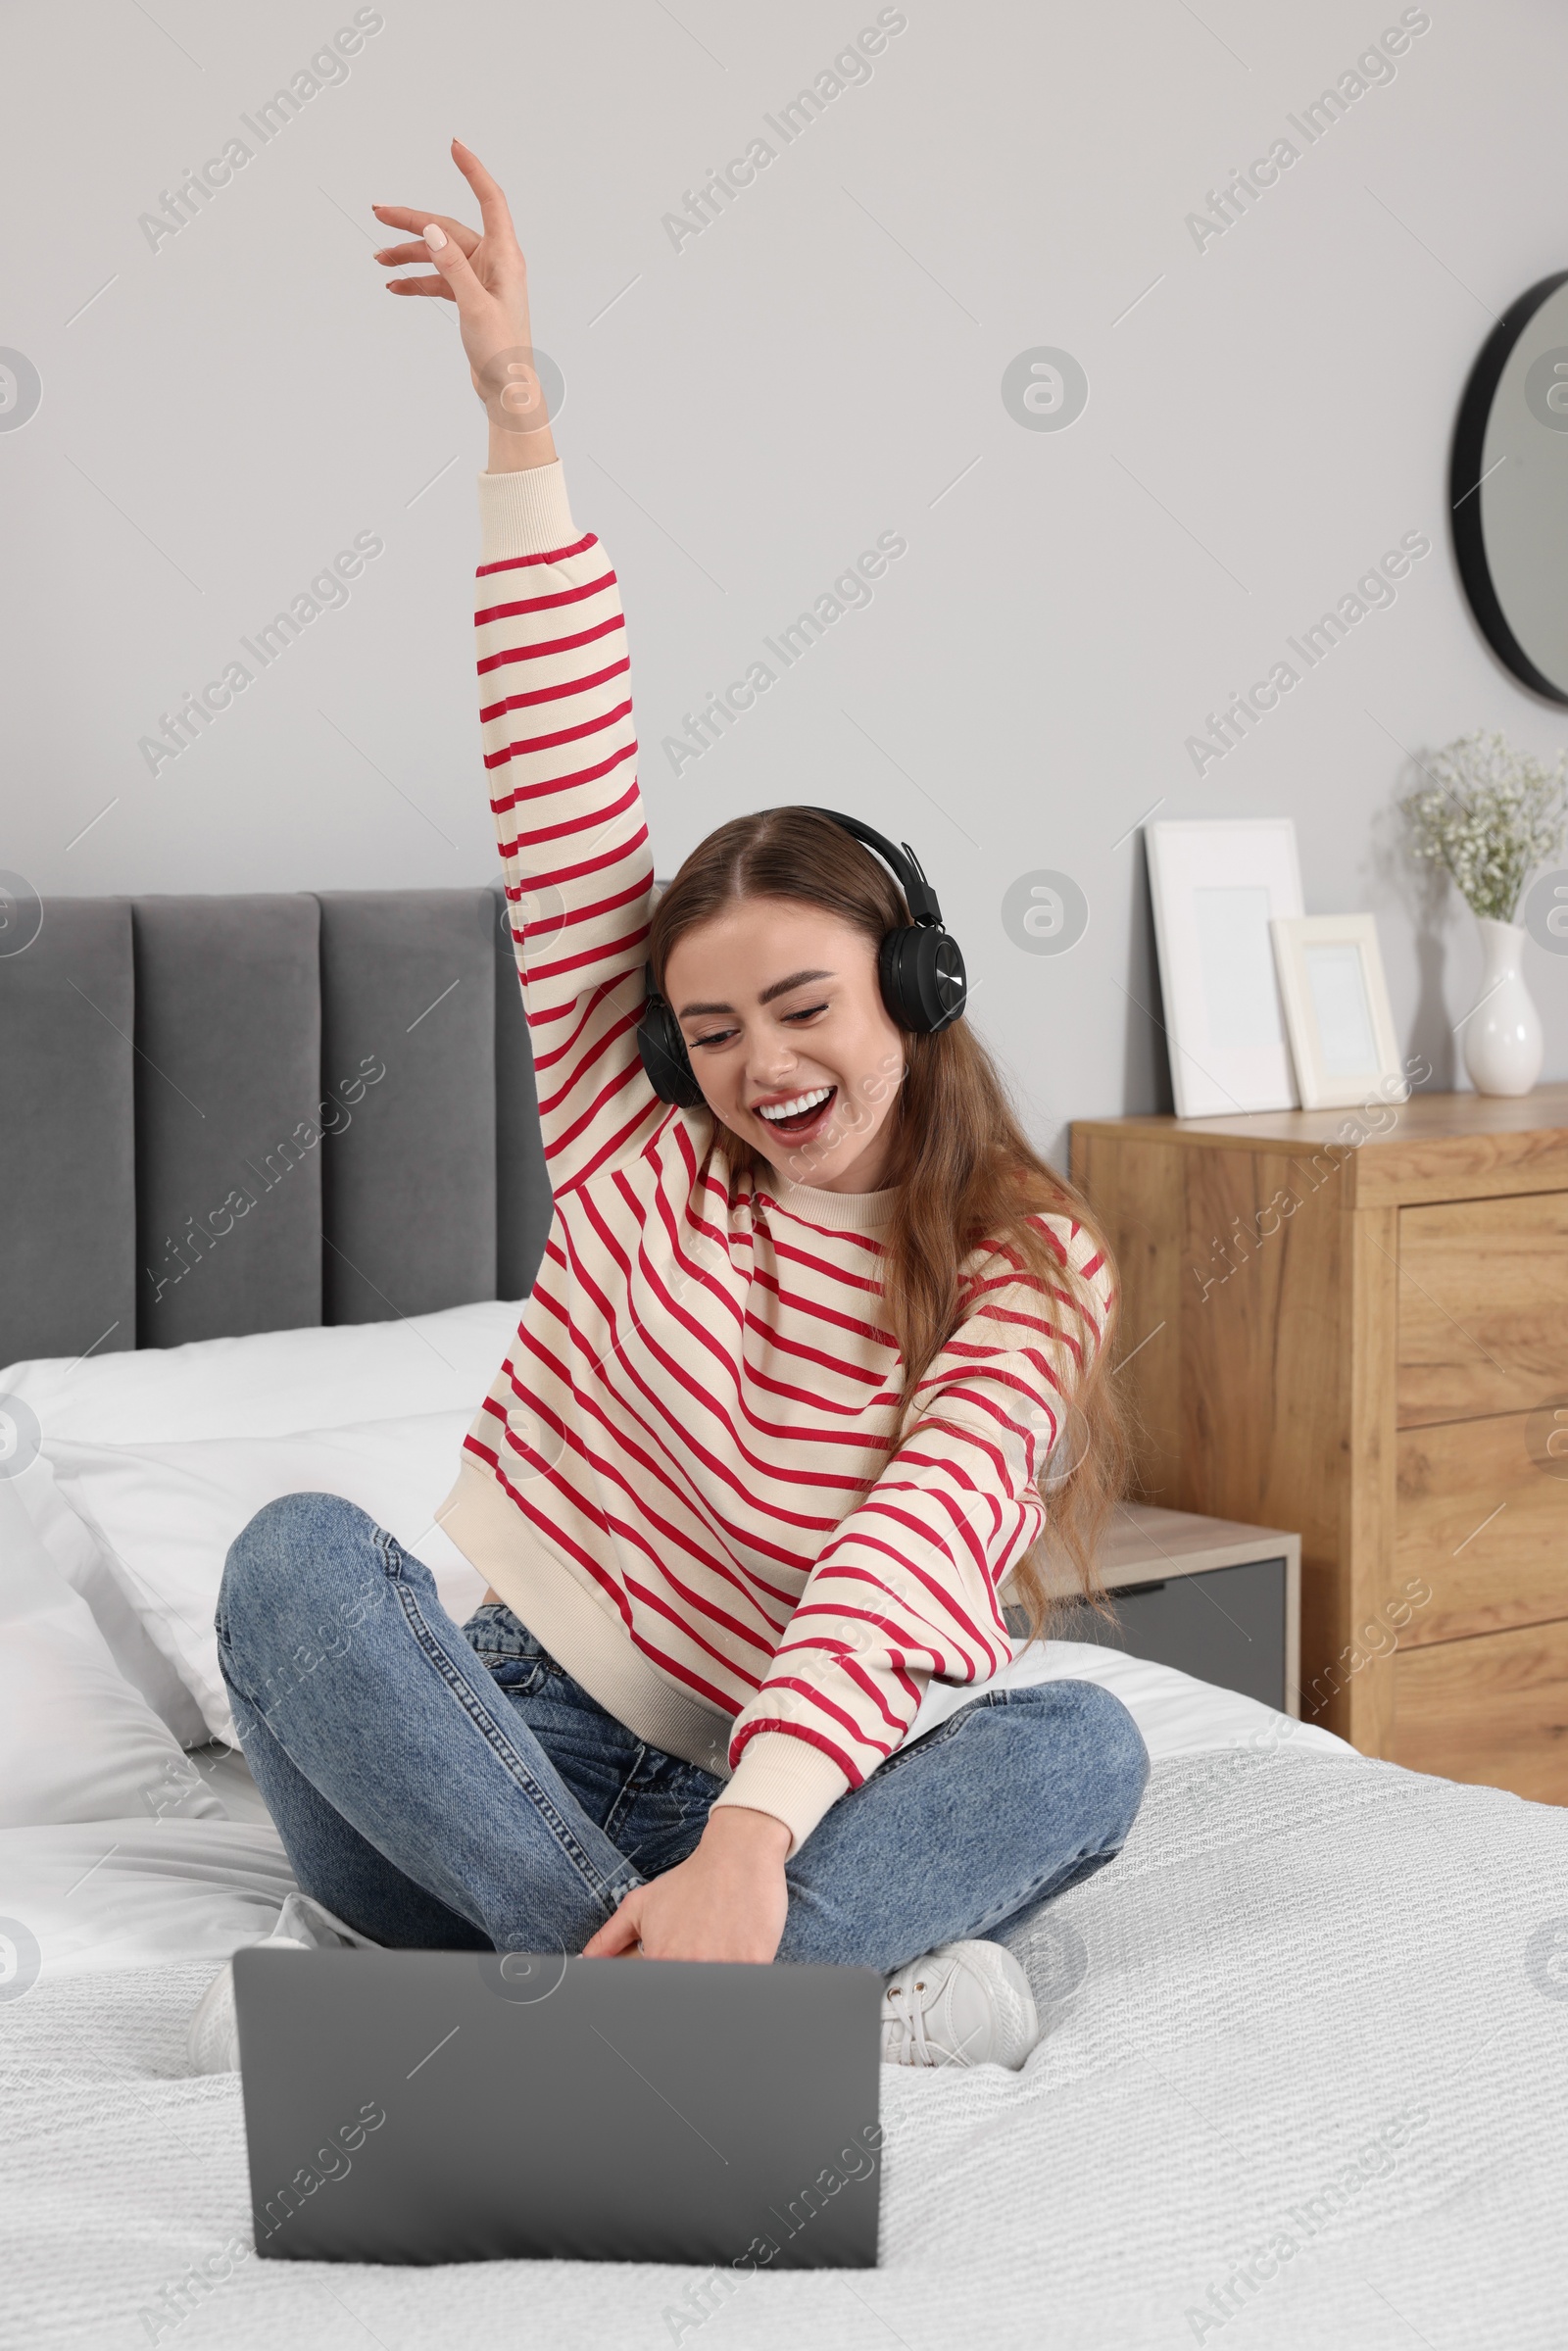 Photo of Happy woman with headphones listening to music near laptop on bed in bedroom